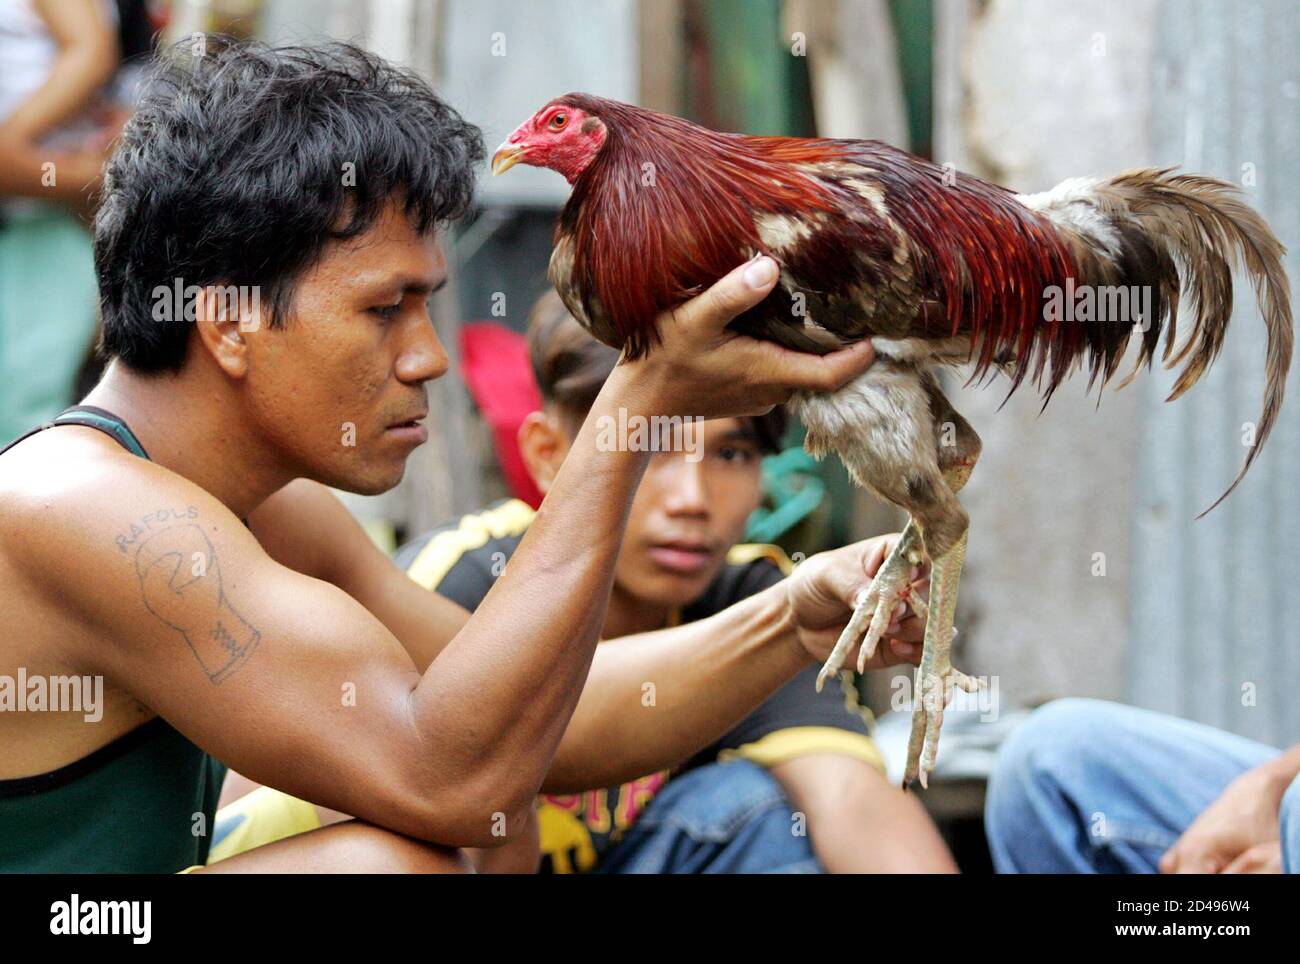 Cockfighting In The Phillipines